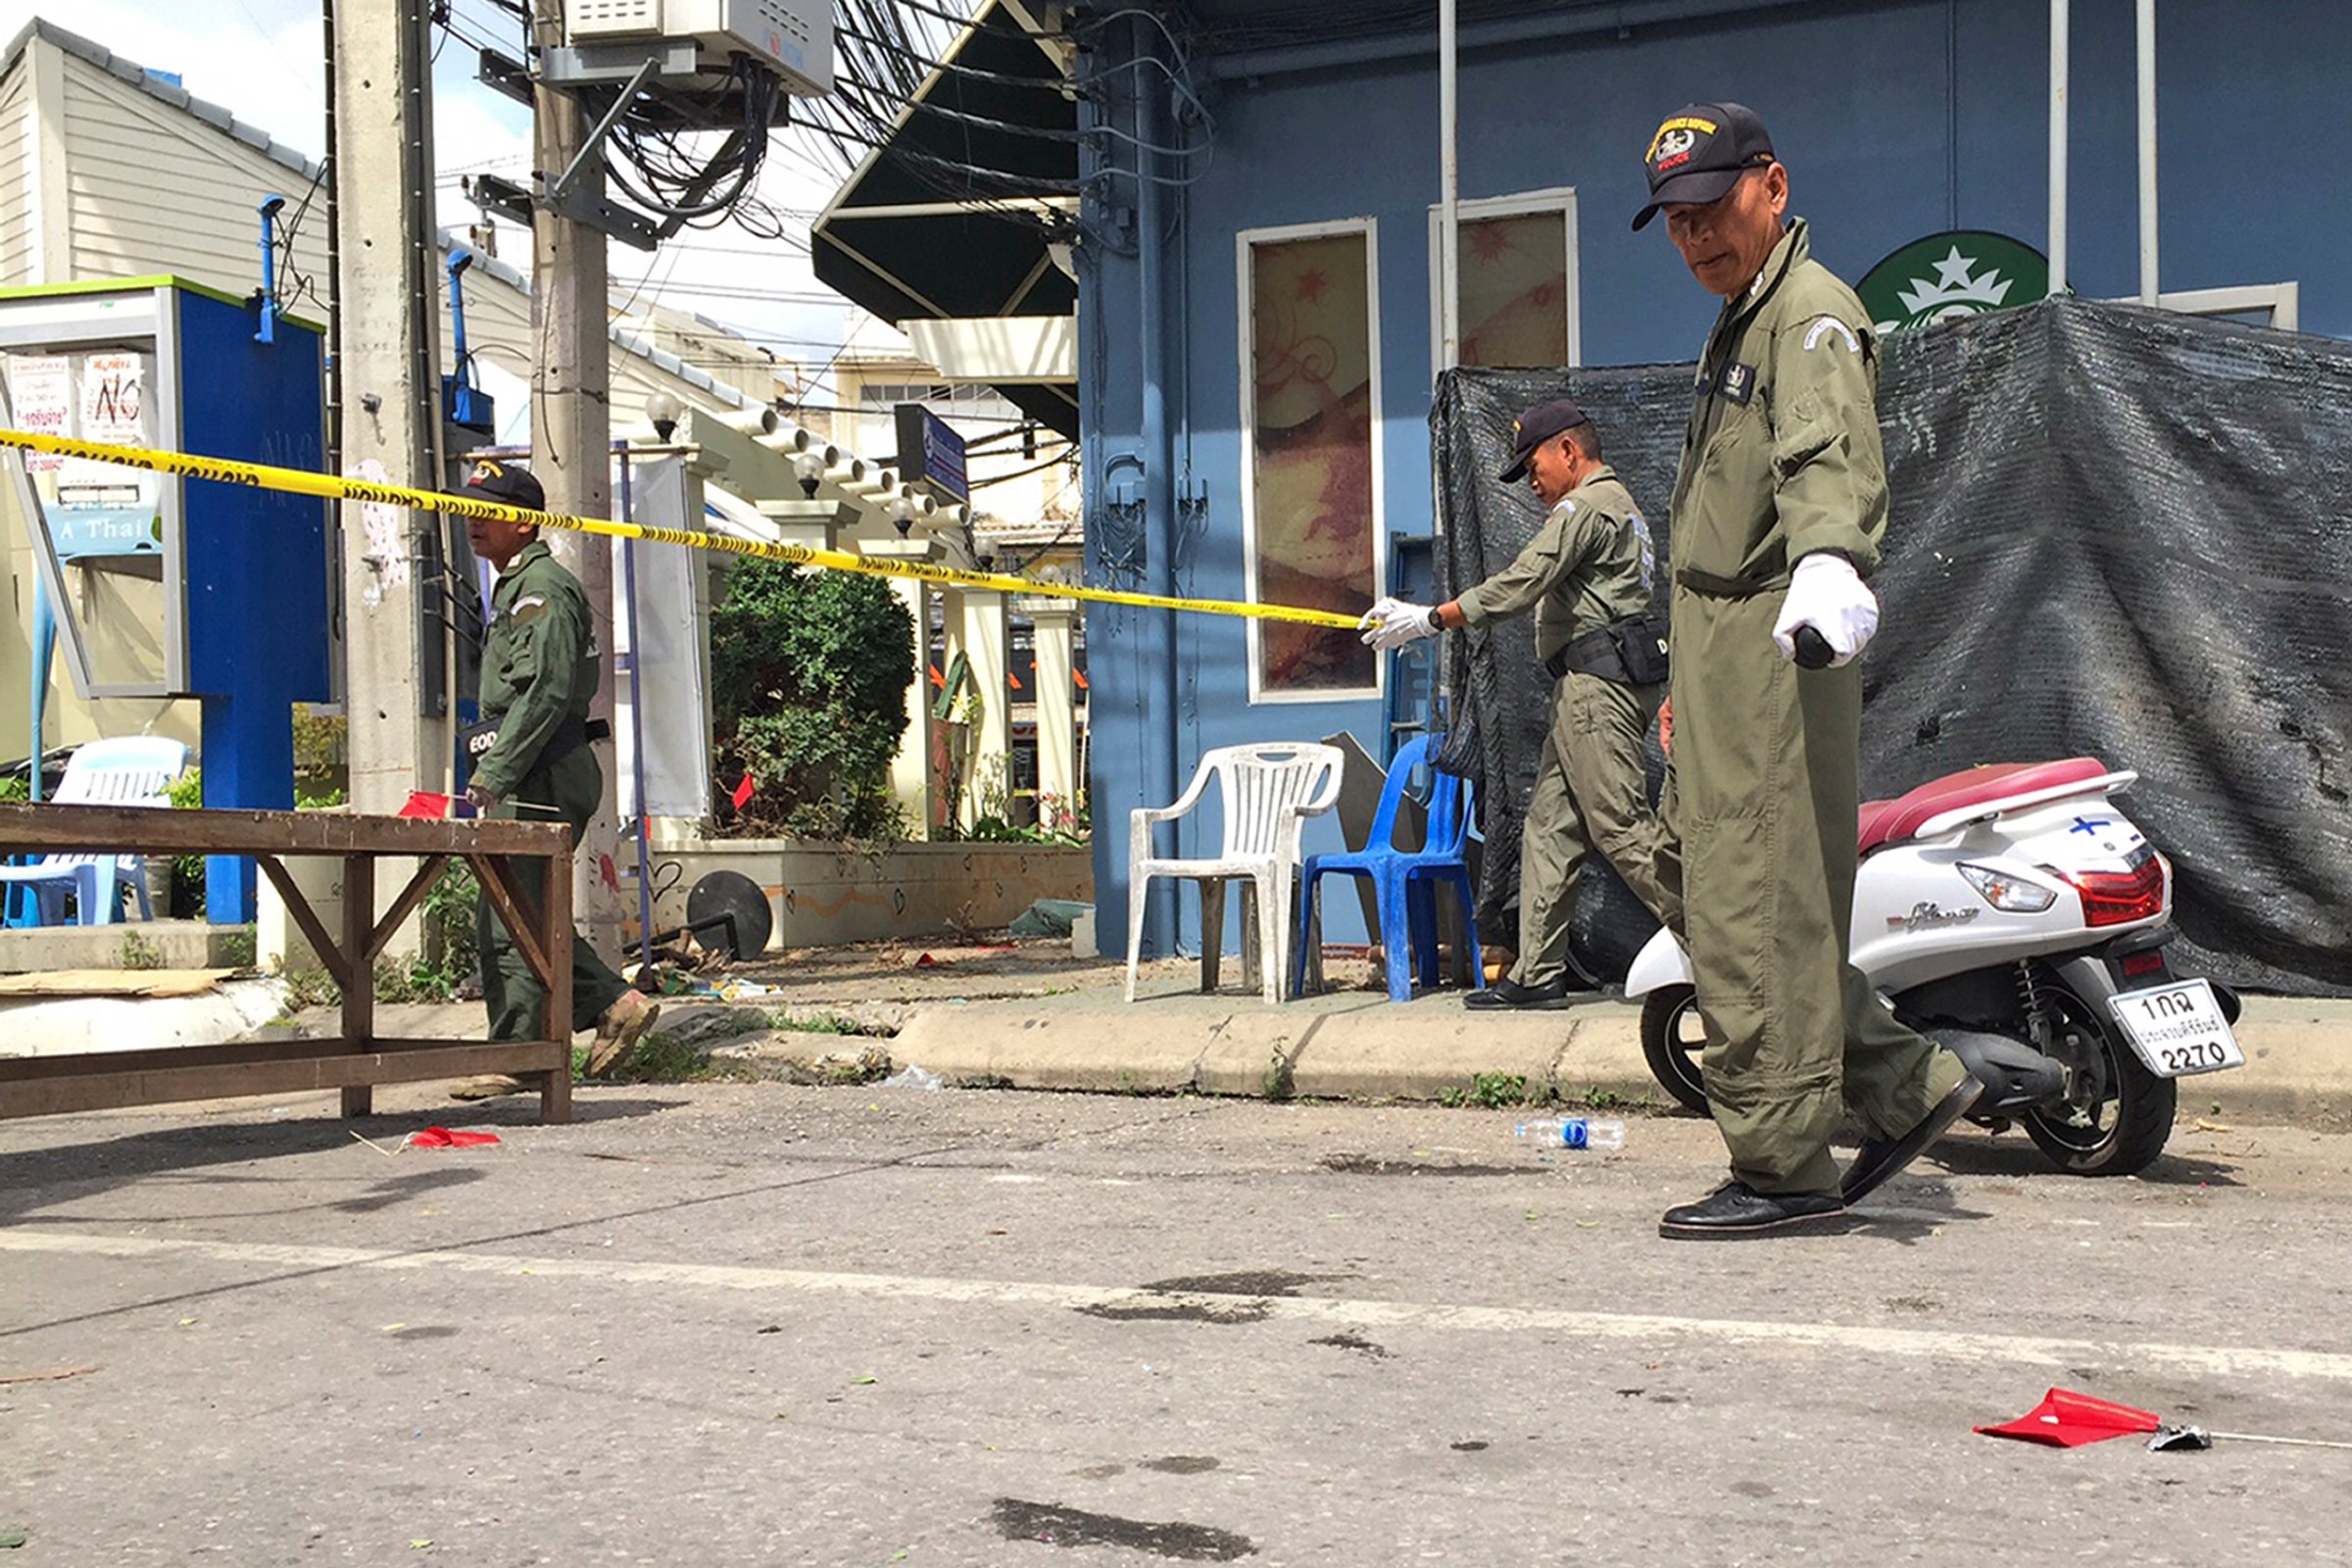 FILE - In this Friday, Aug. 12, 2016 file, investigators work at the scene of an explosion in the resort town of Hua Hin, 240 kilometers (150 miles) south of Bangkok, Thailand. Thai authorities said Monday, Aug. 15, they are investigating whether bombings last week at several popular tourist destinations were related to long-term separatist violence in the country's far south, backing away from assertions that partisan politics were behind them. (AP Photo/Jerry Harmer, File)